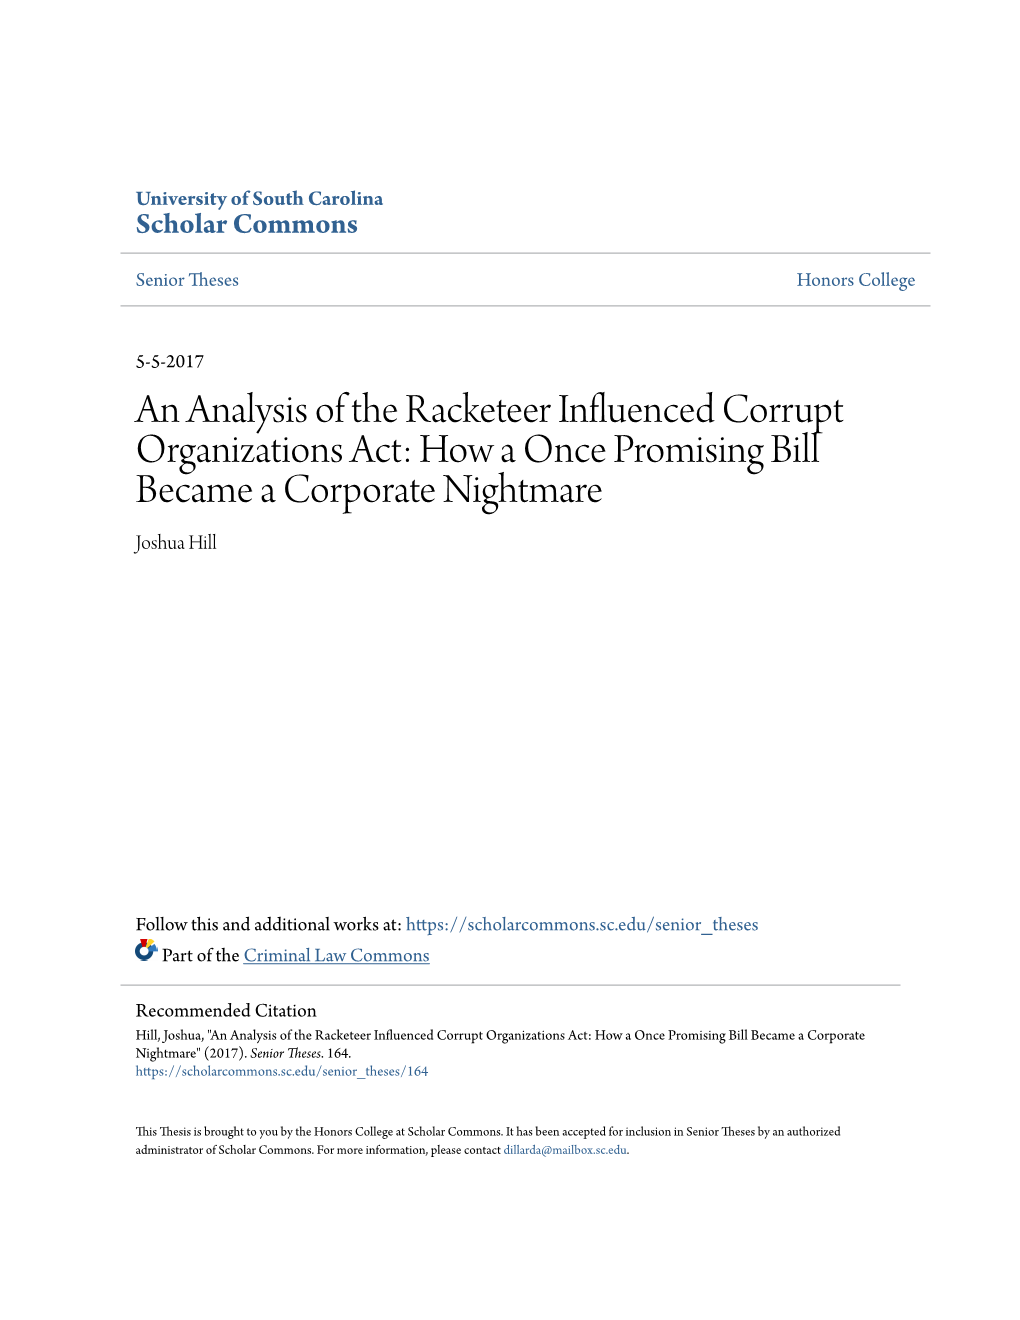 An Analysis of the Racketeer Influenced Corrupt Organizations Act: How a Once Promising Bill Became a Corporate Nightmare Joshua Hill